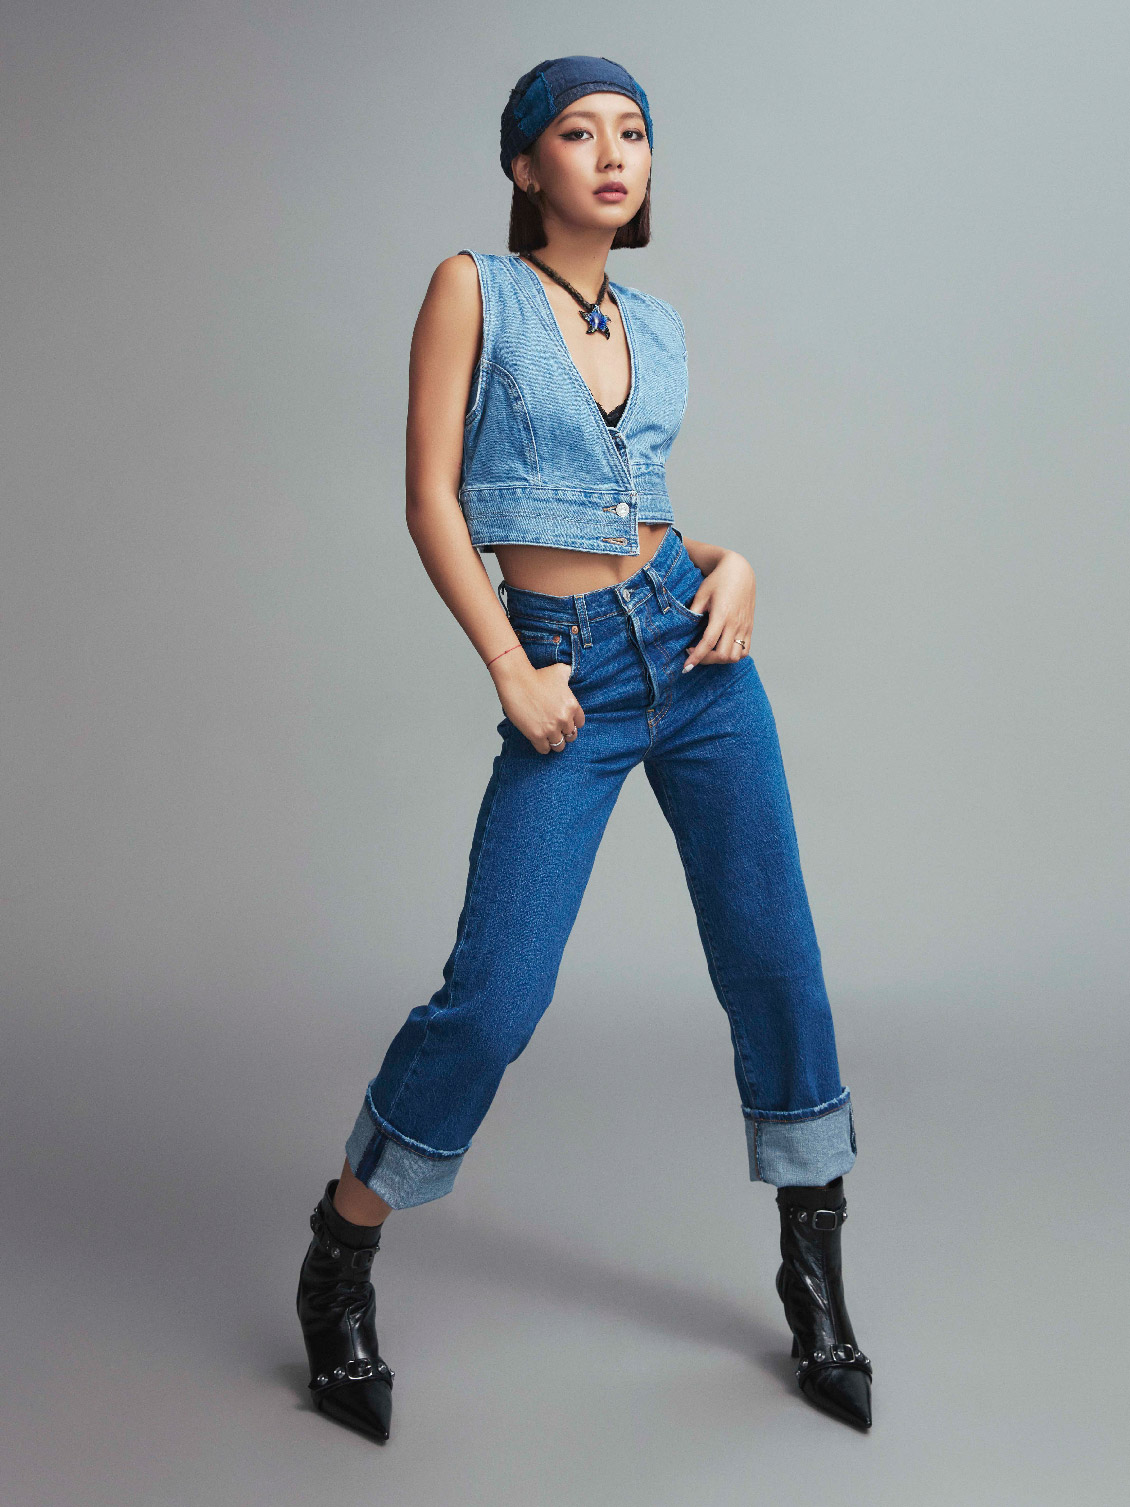 Marf styled in Women's Raine Denim Crop Top and Ribcage Straight Ankle Jeans - Levi's Hong Kong